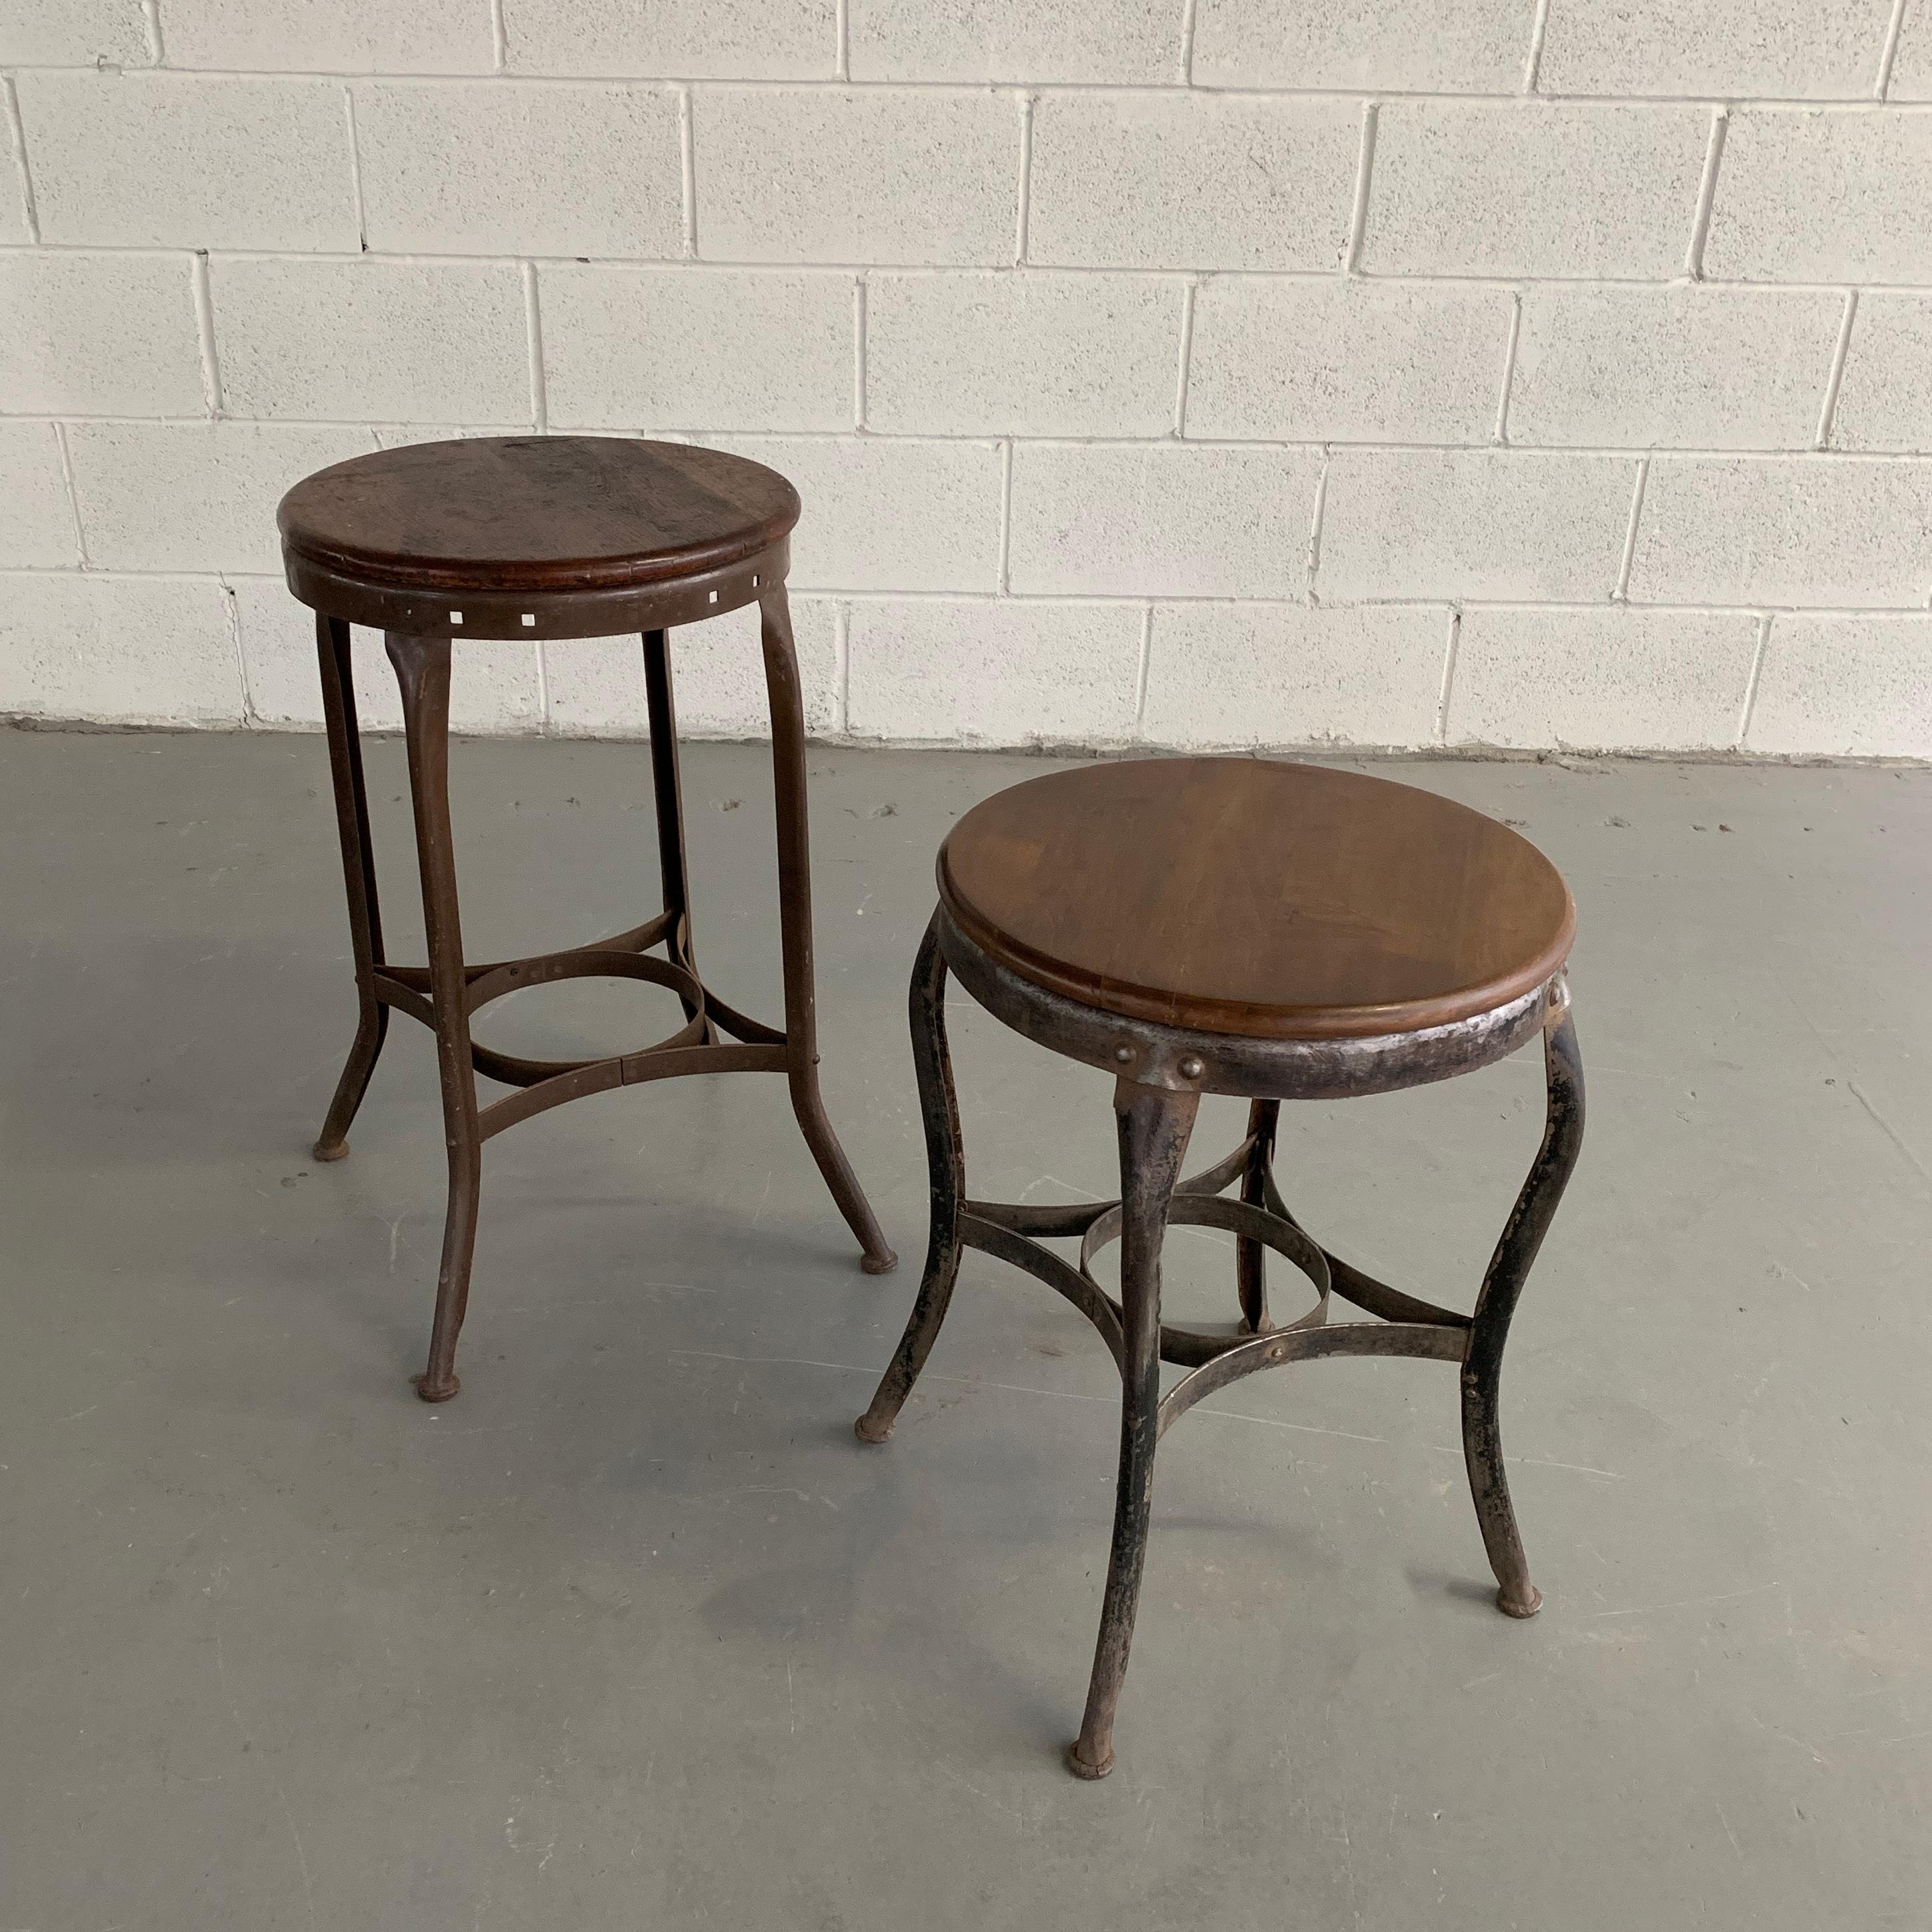 American Industrial Counter Height Toledo Shop Stool For Sale